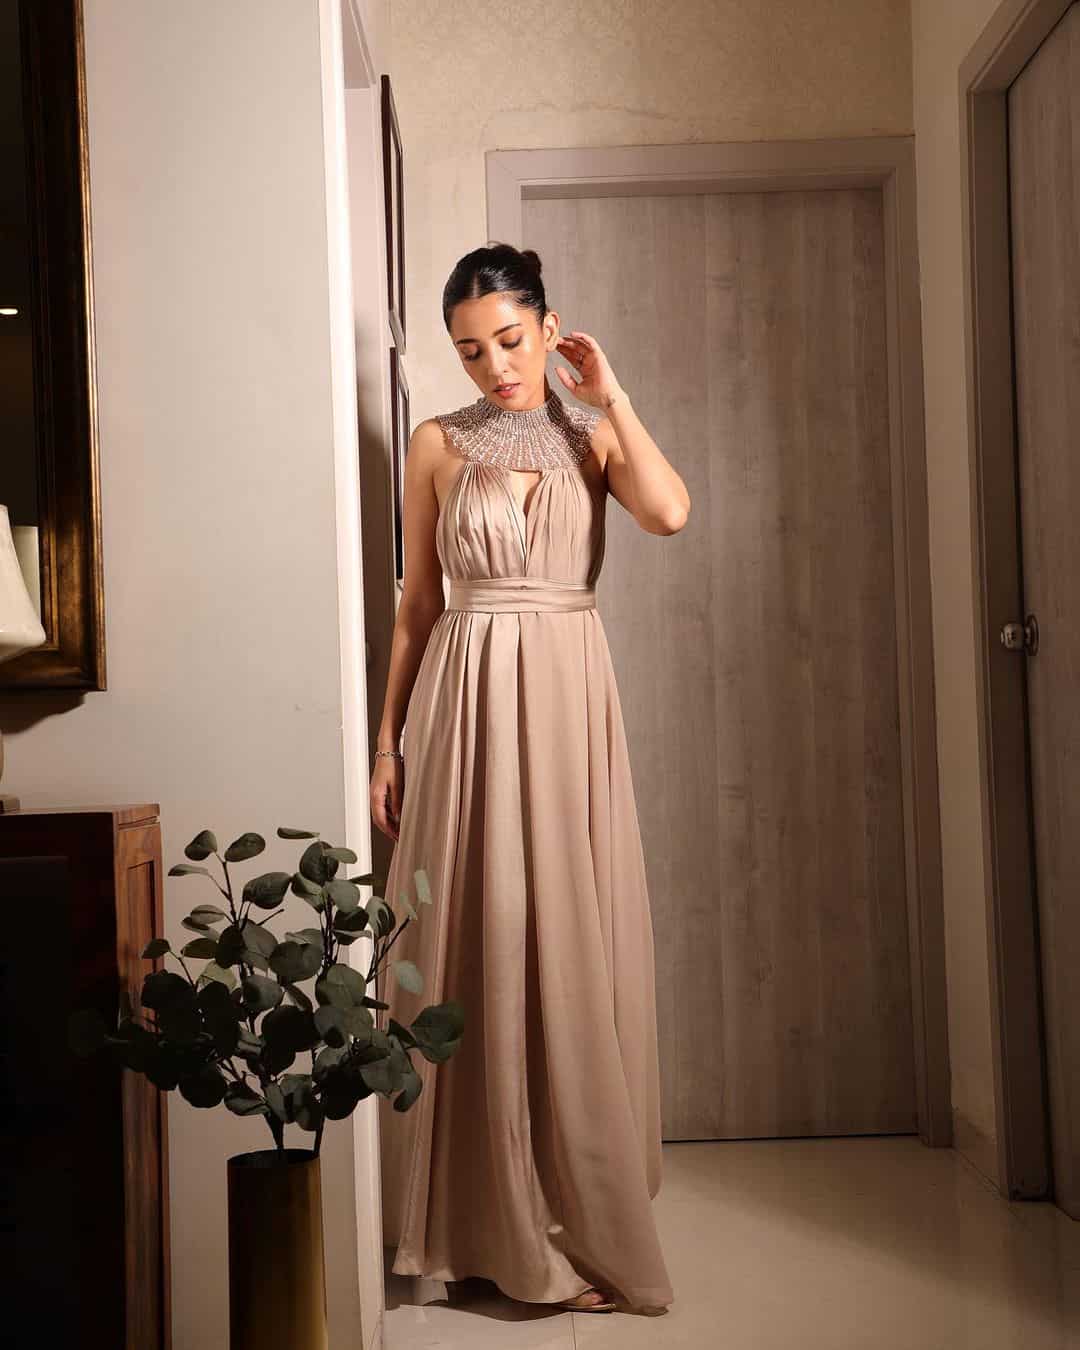 Birdy Grey Cindy Dress in Satin Neutral Champagne Bridesmaid Dress | The  Knot